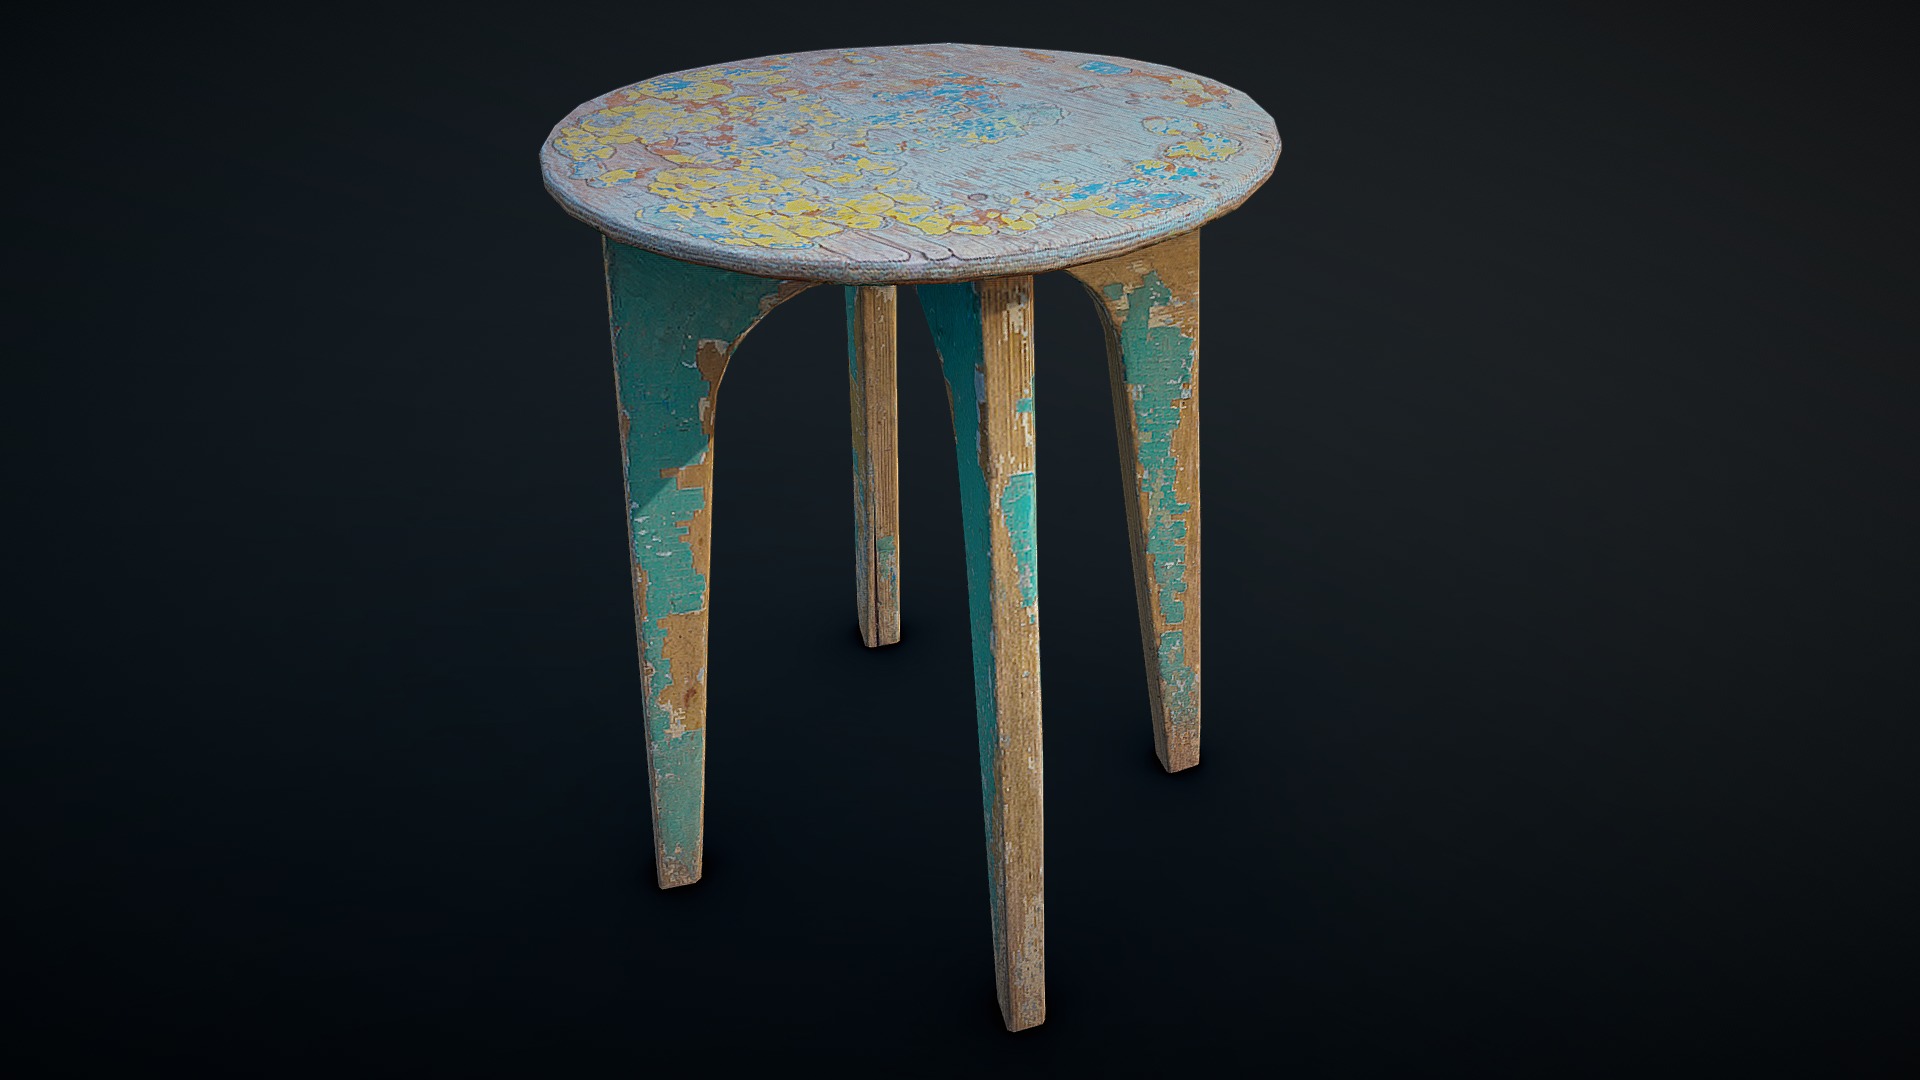 3D model Old Stool - This is a 3D model of the Old Stool. The 3D model is about a wooden stool with a blue and green design.